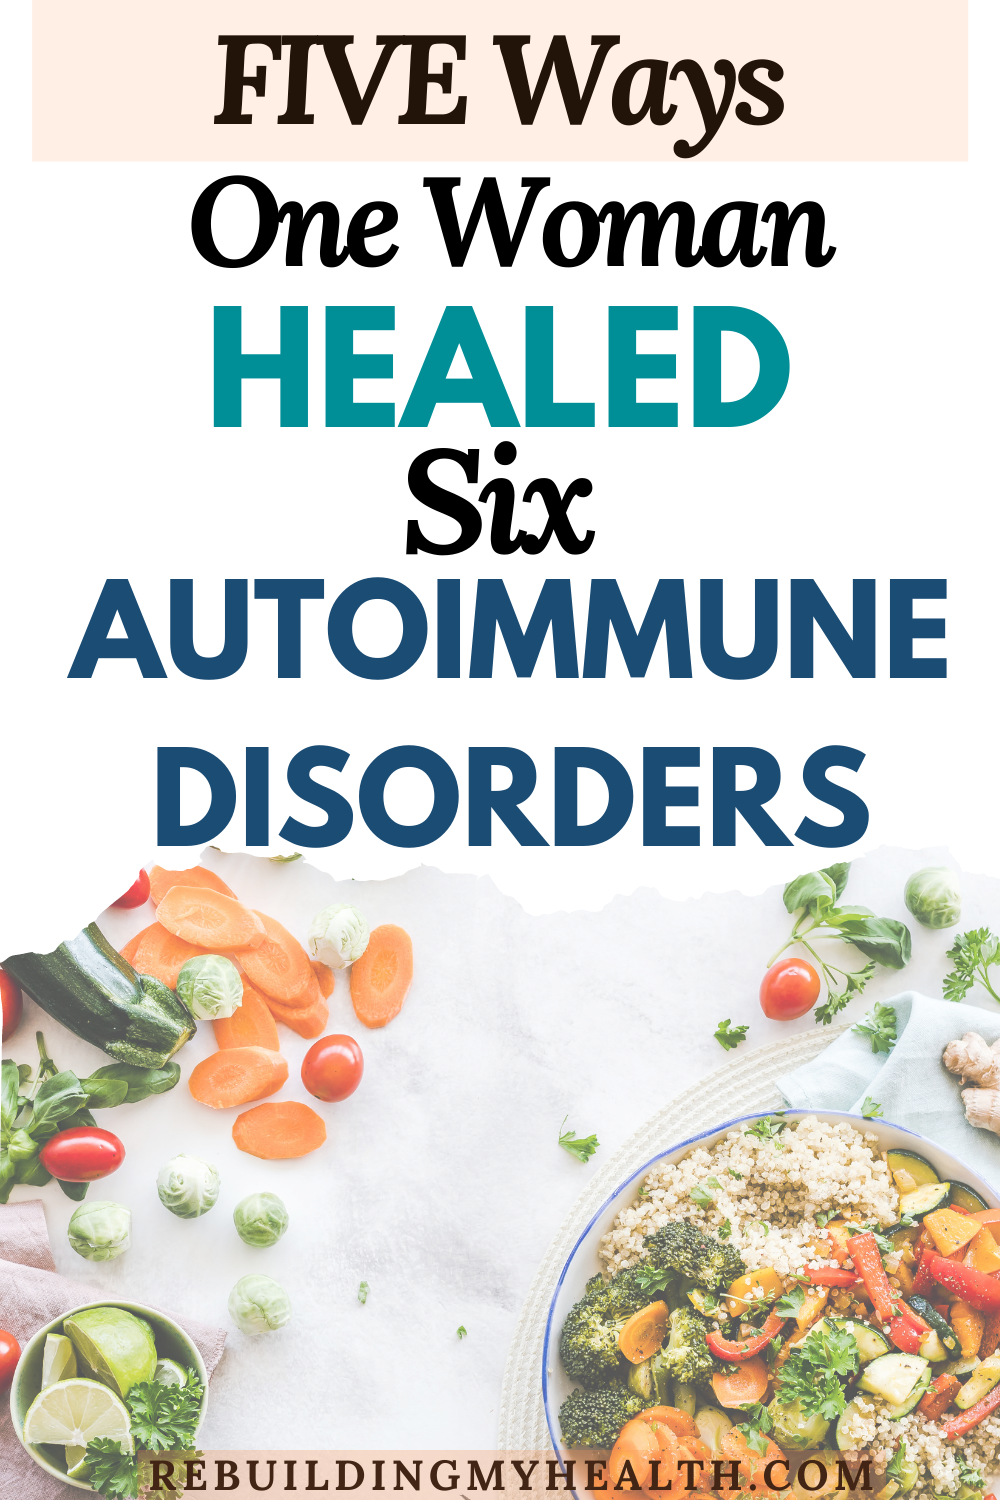 Shannon healed from six autoimmune disorders and other debilitating conditions through The Wahls Protocol diet, methylation support, movement, mindset and eliminating negative influences.